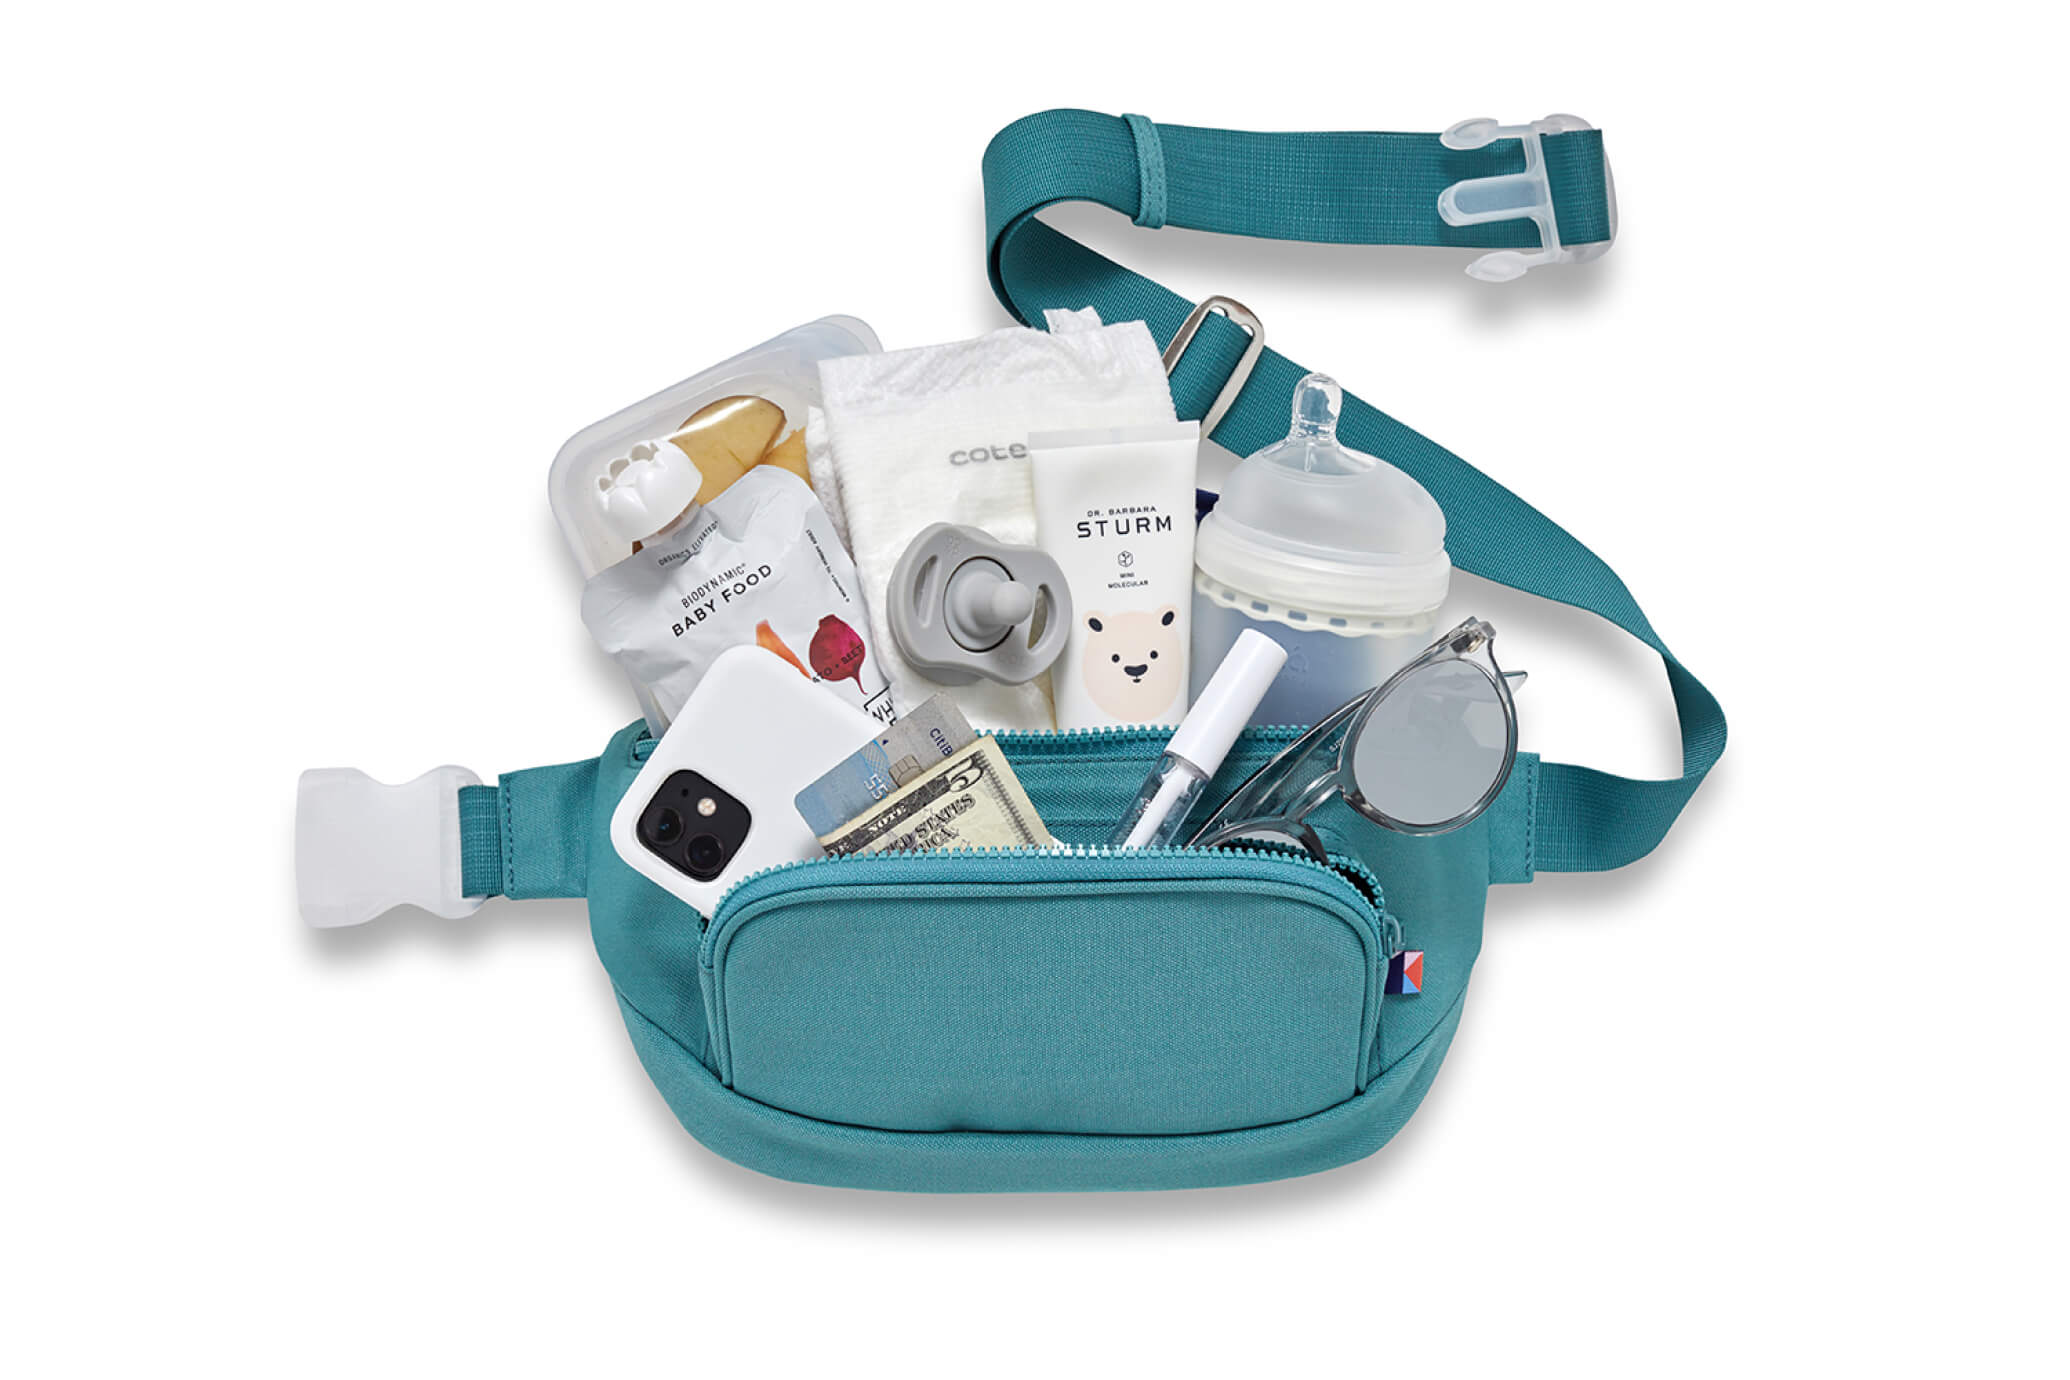 Our diaper bag and fanny packs can fit all of your essentials with your pets or children like food, bottles, car keys, wallet and more with room to grow